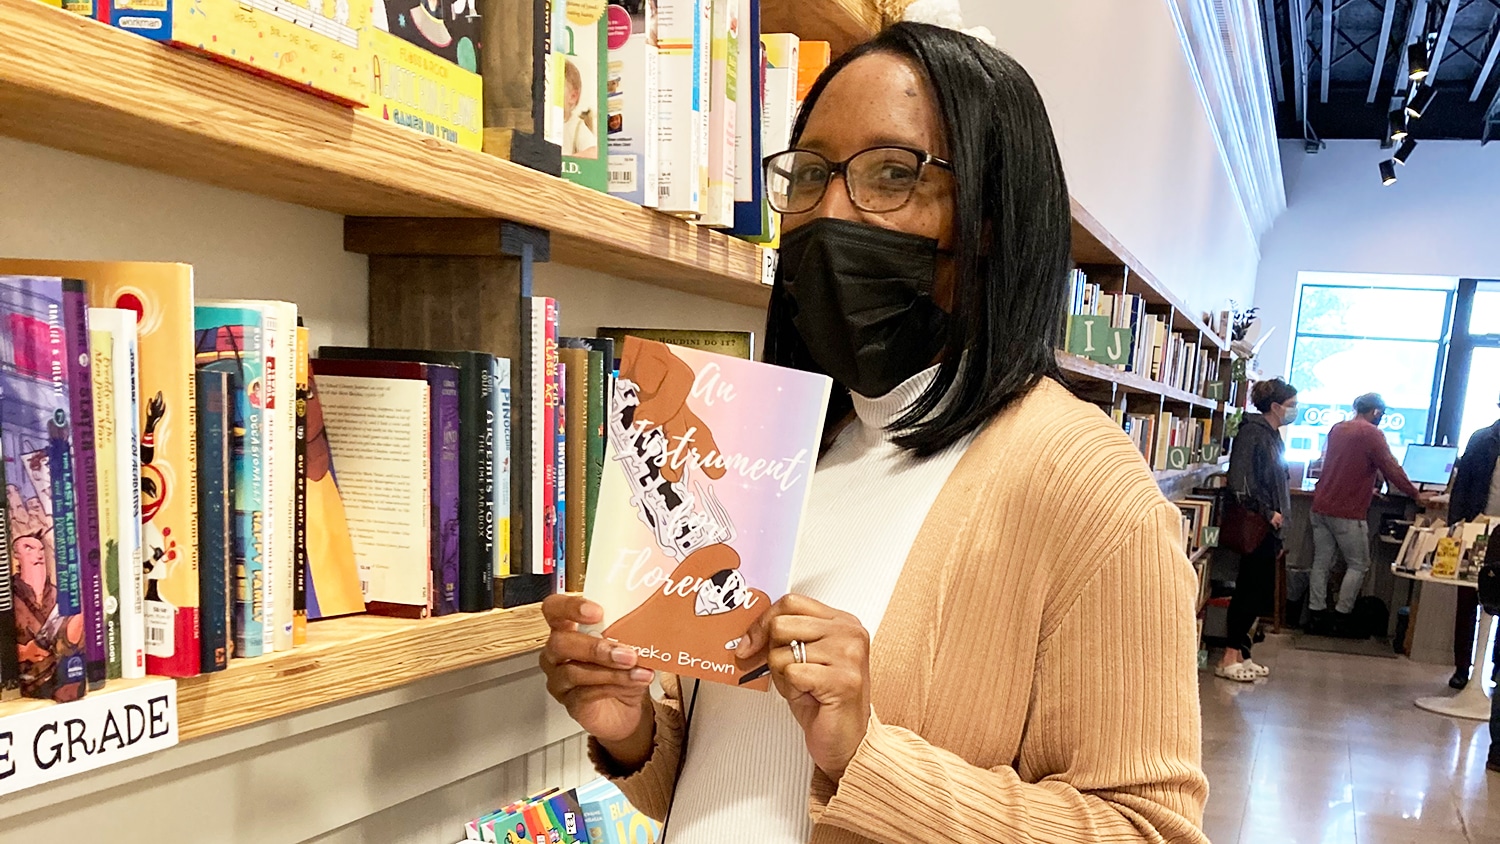 Tomeko Brown with a copy of her book at a bookstore